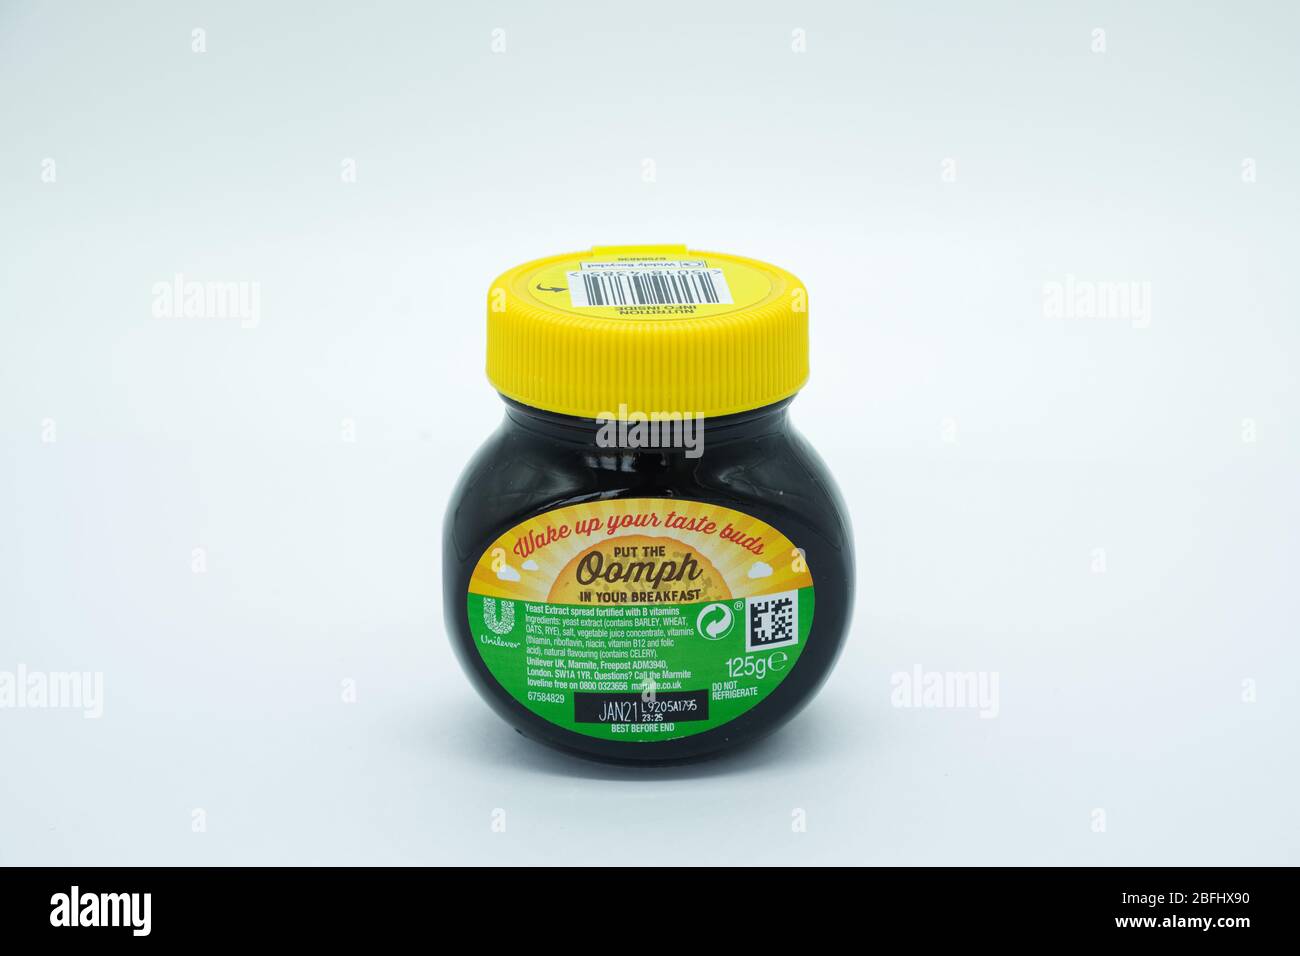 Irvine, Scotland, UK - April 18, 2020: Jar of Marmite branded yeast extract  in recyclable bottle and plastic cap and suitable for Vegans Stock Photo -  Alamy